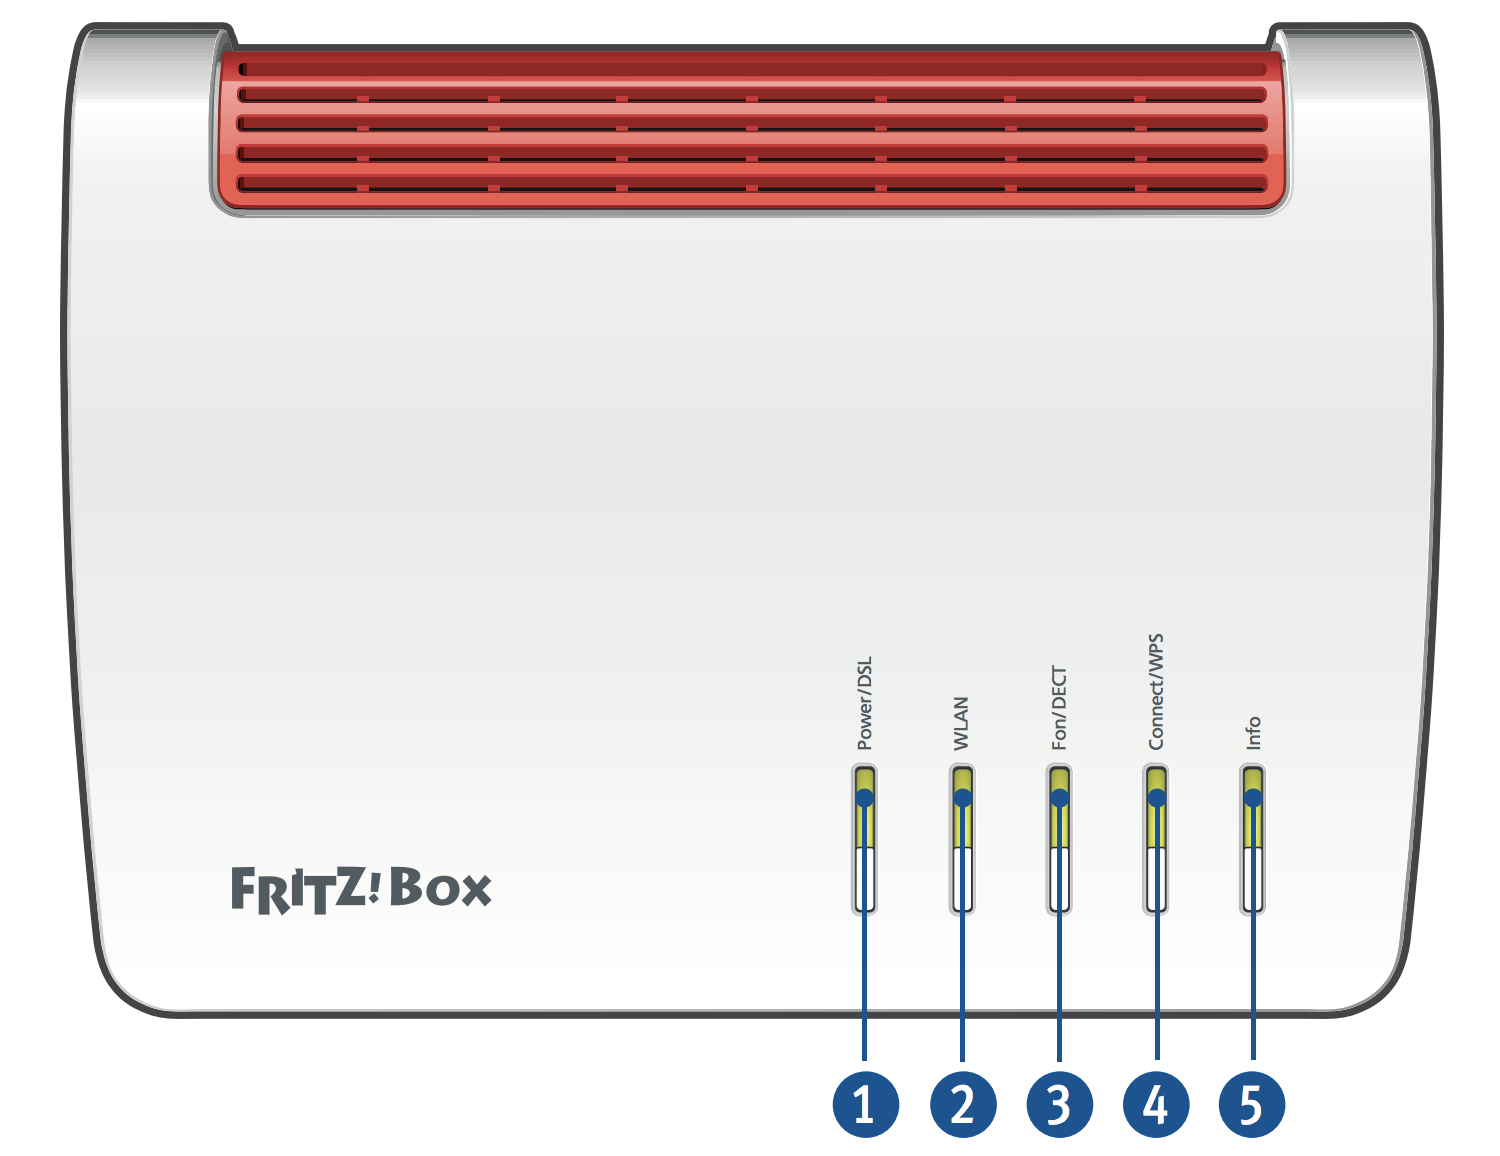 How do I install and configure my FRITZ!Box 7530 for use with a fiber connection